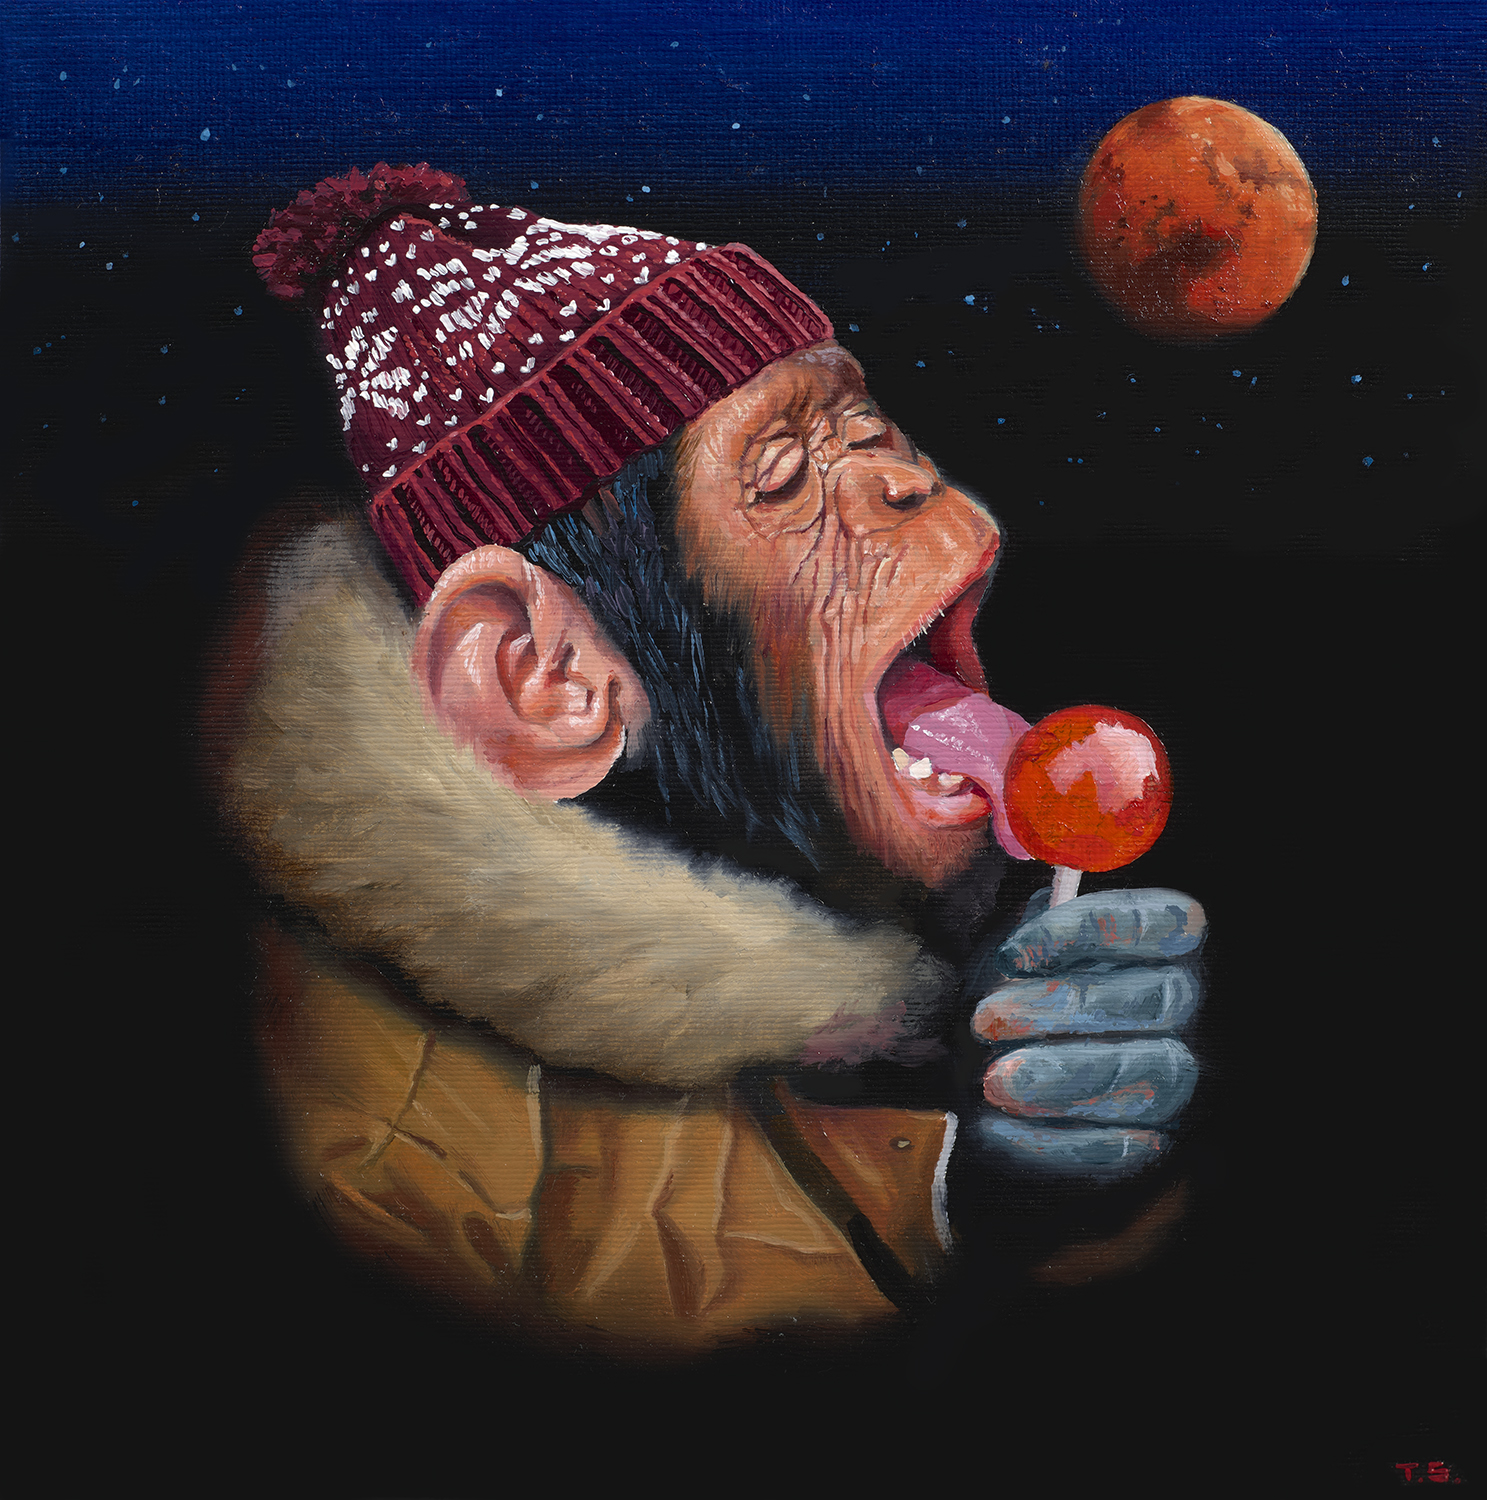 A monkey liking a round lollipop with a planet in the background - Tony South - Planets Aligned